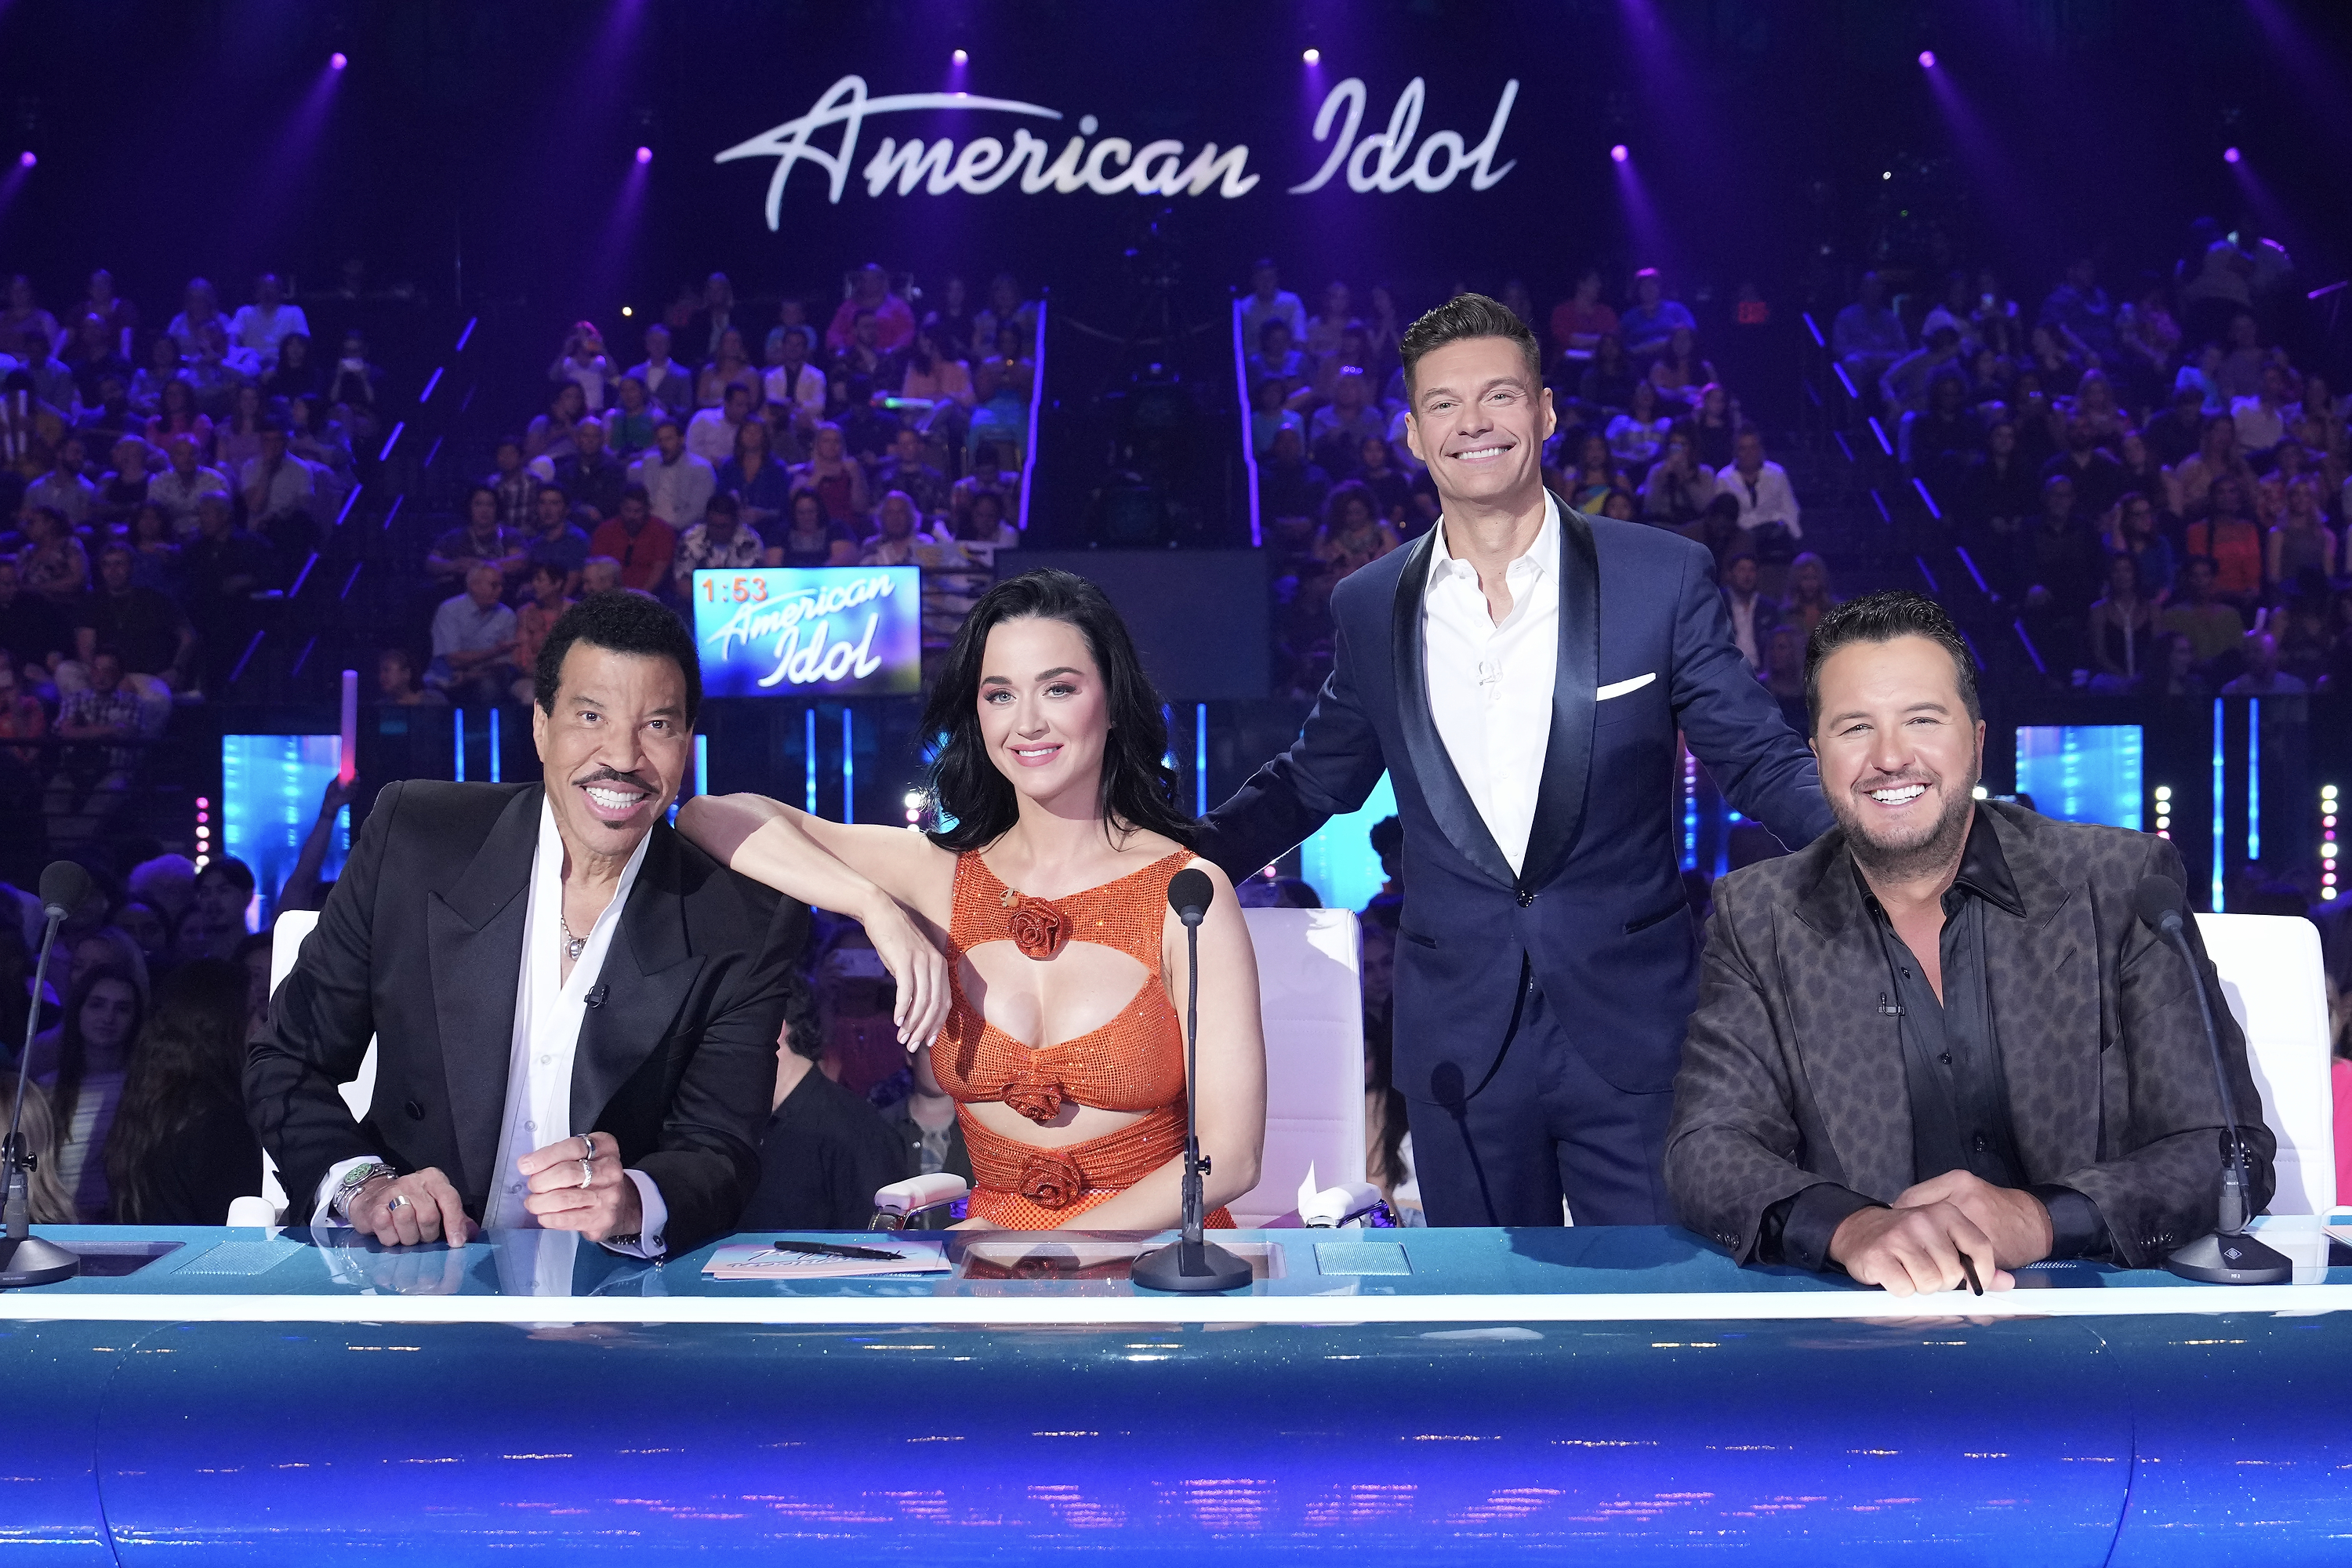 Ryan with the hosts of American Idol Lionel Ritchie, Katy Perry, and Luke Bryan